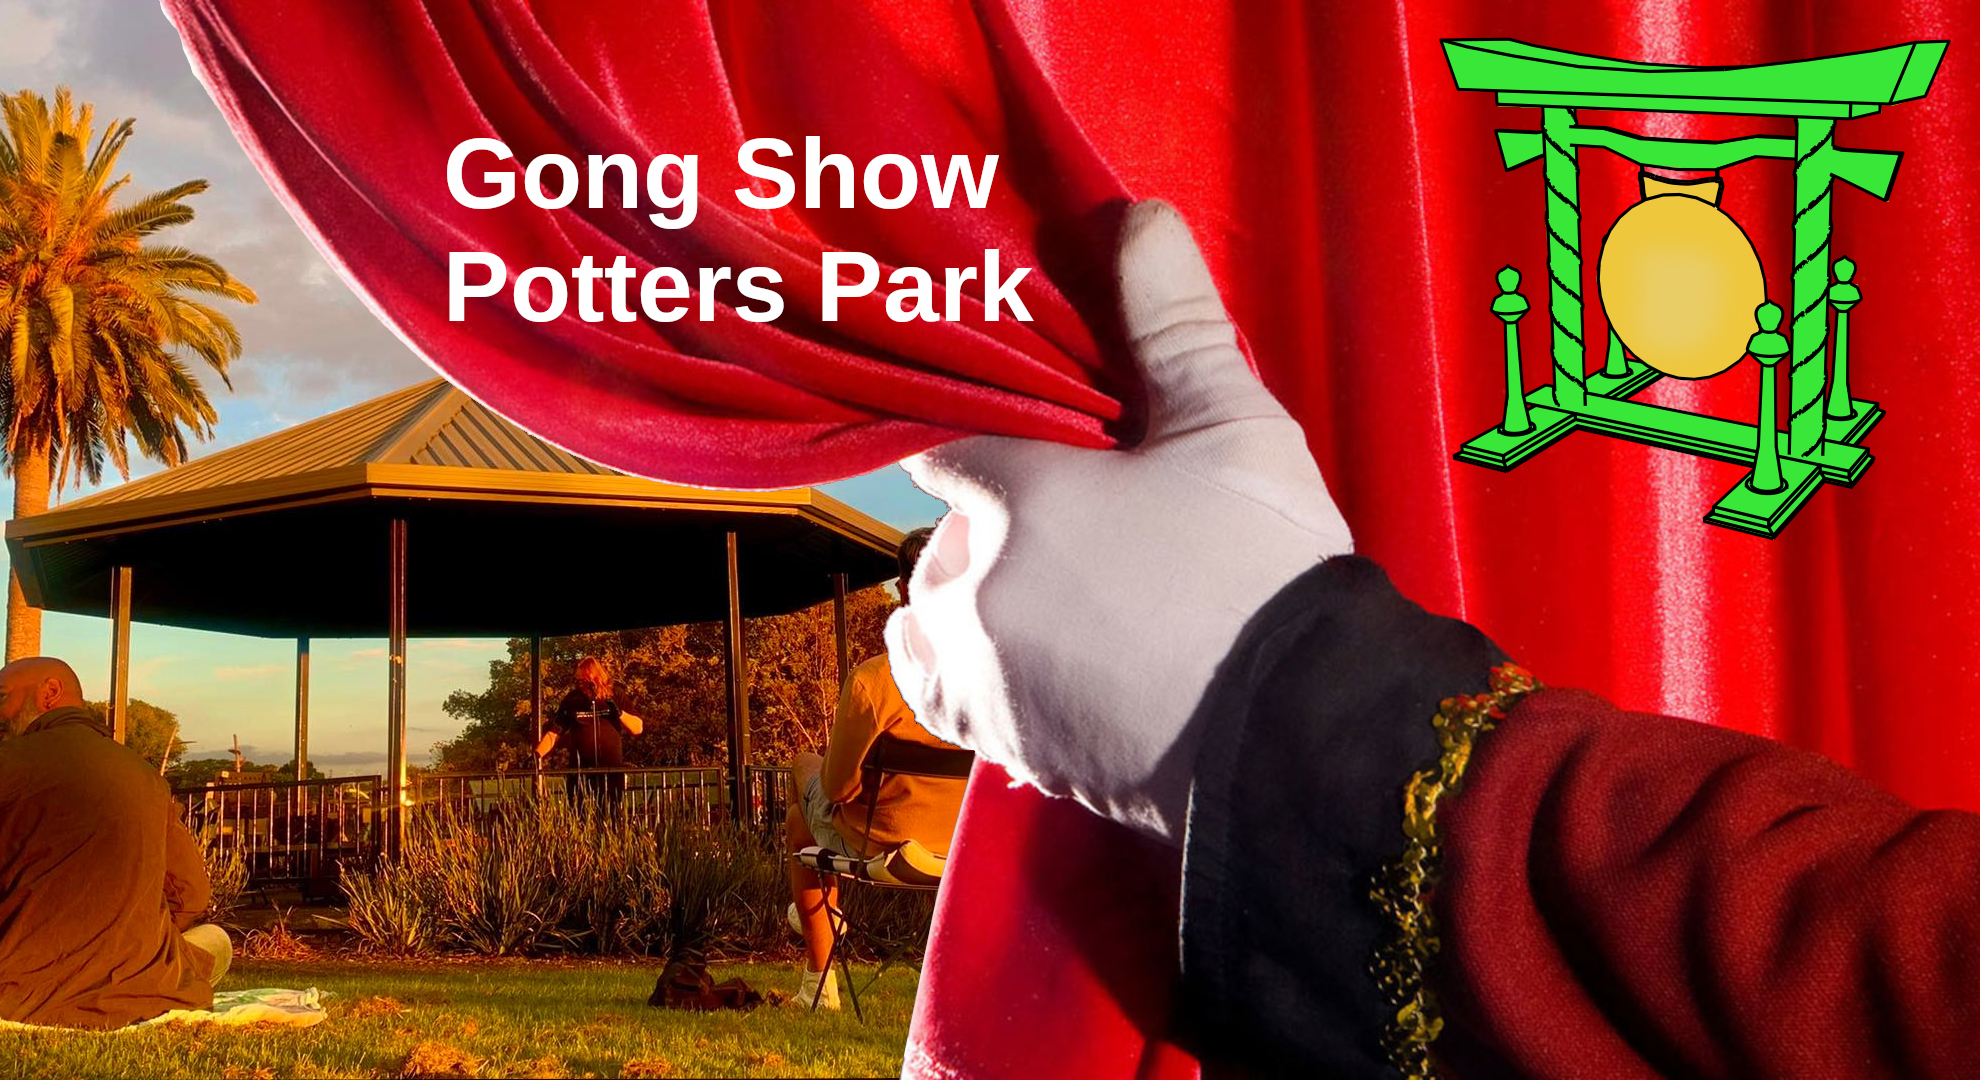 A gloved hand hold back a curtain to reveal the gazebo in Potters Park. A large gong is also revealed. Text: Gong Show Potters Park.